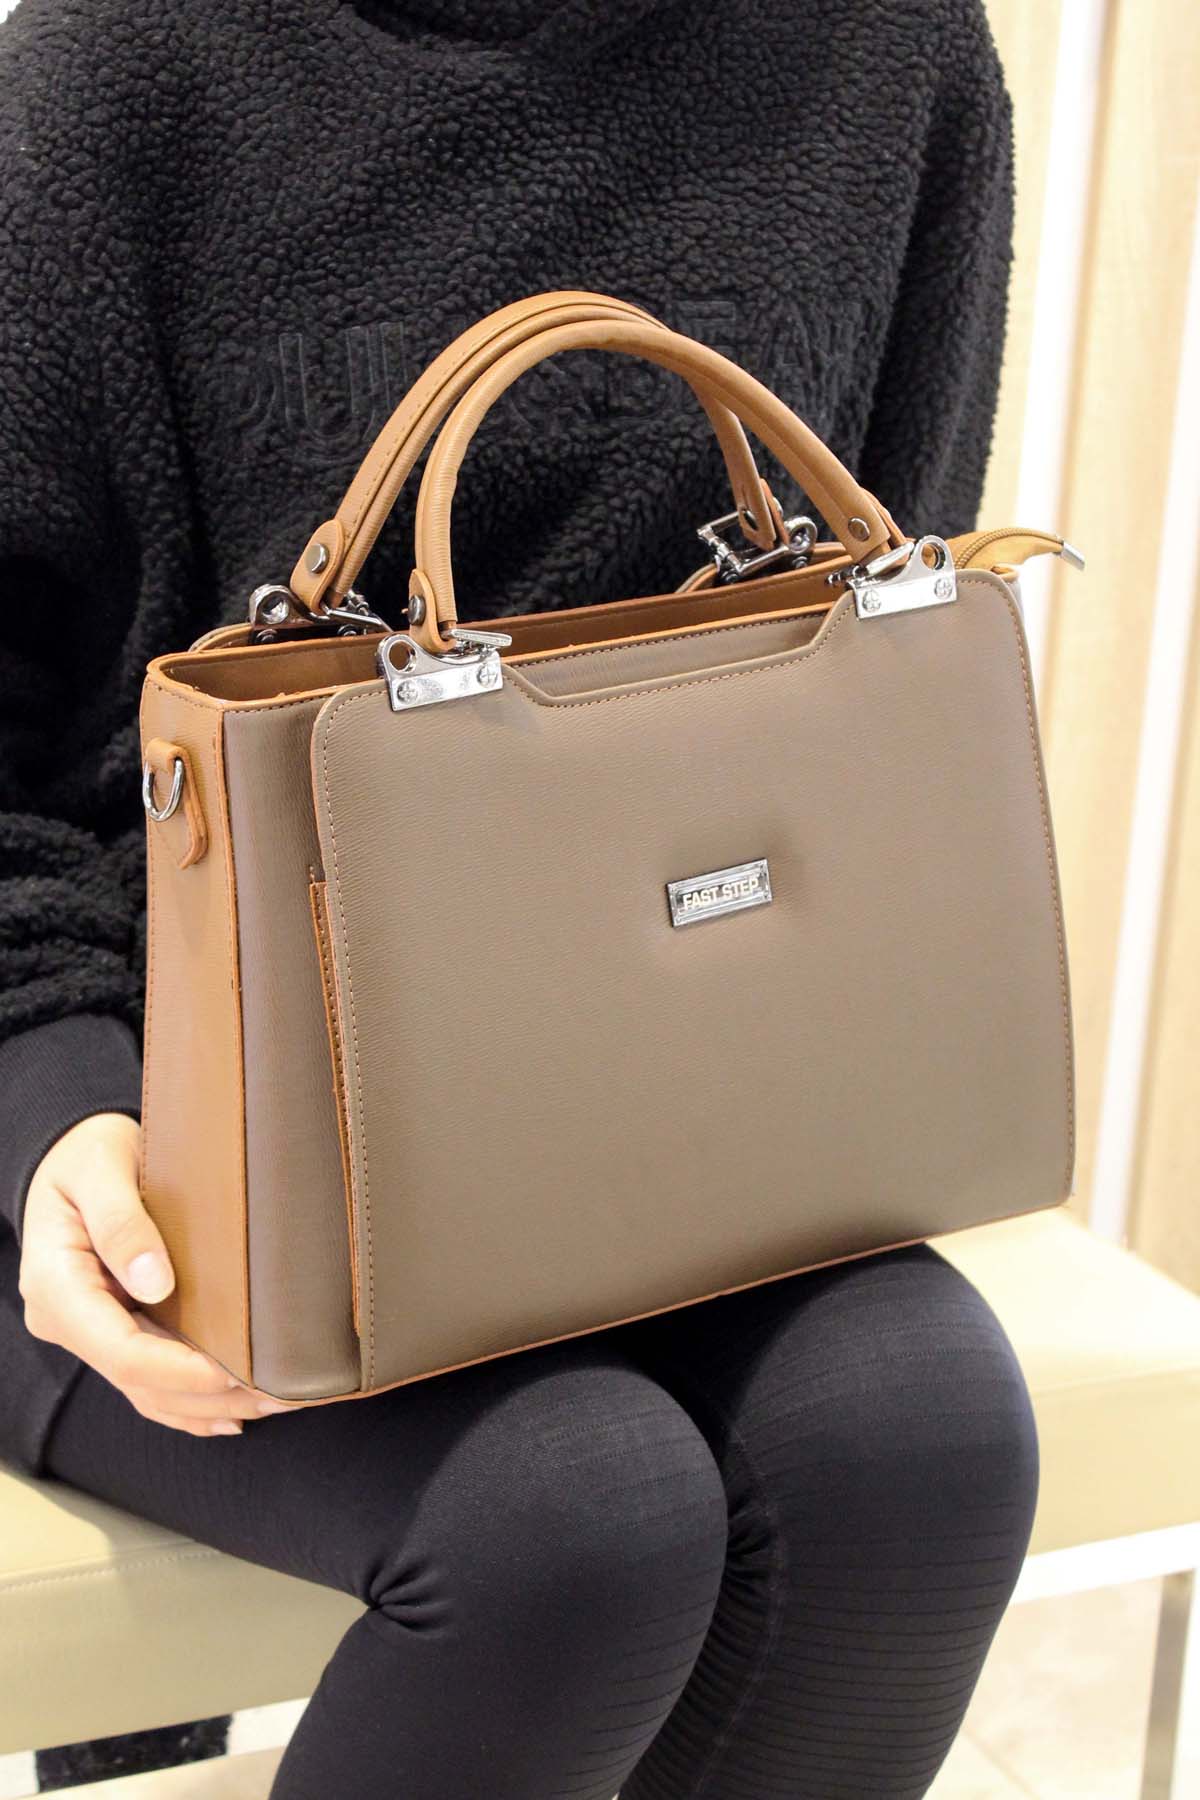 Fast Step Women Bags Gingery Brown 337CA952